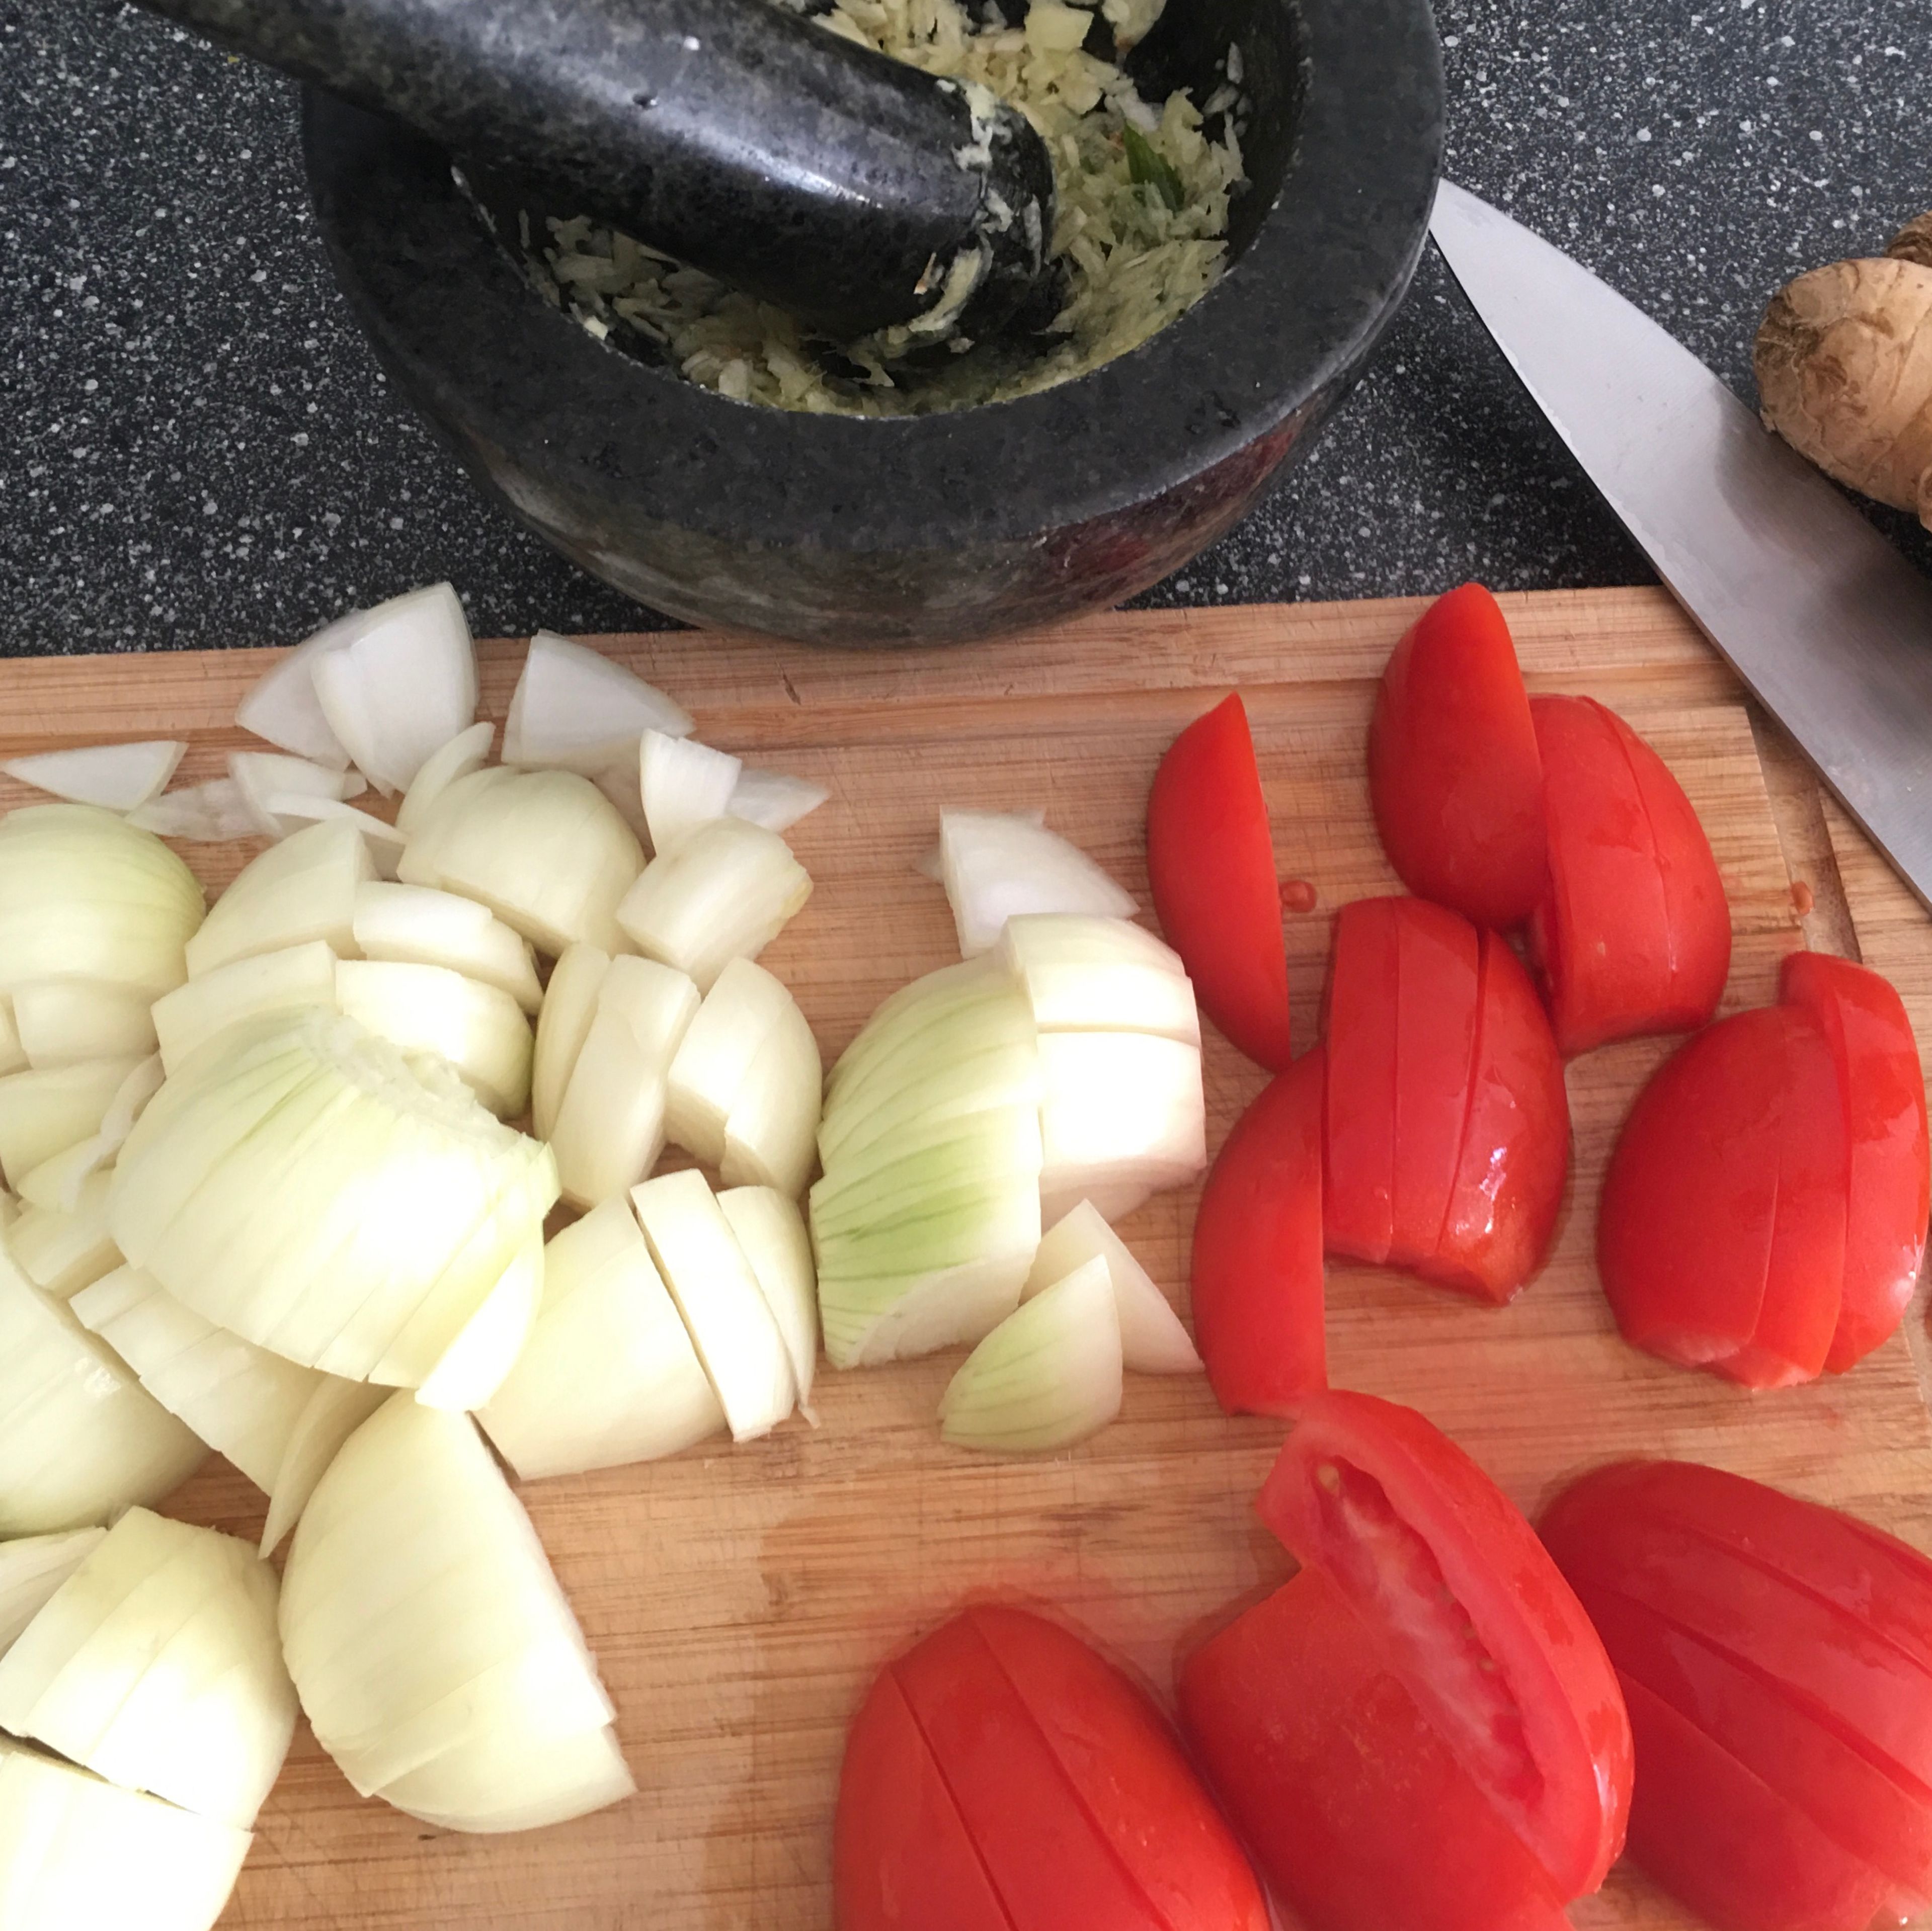 Roughly slice the onions and tomatoes. Crush/chop ginger and garlic. I usually prefer freshly ground ginger garlic paste for which I use my all-time favourite mortar and pestle.